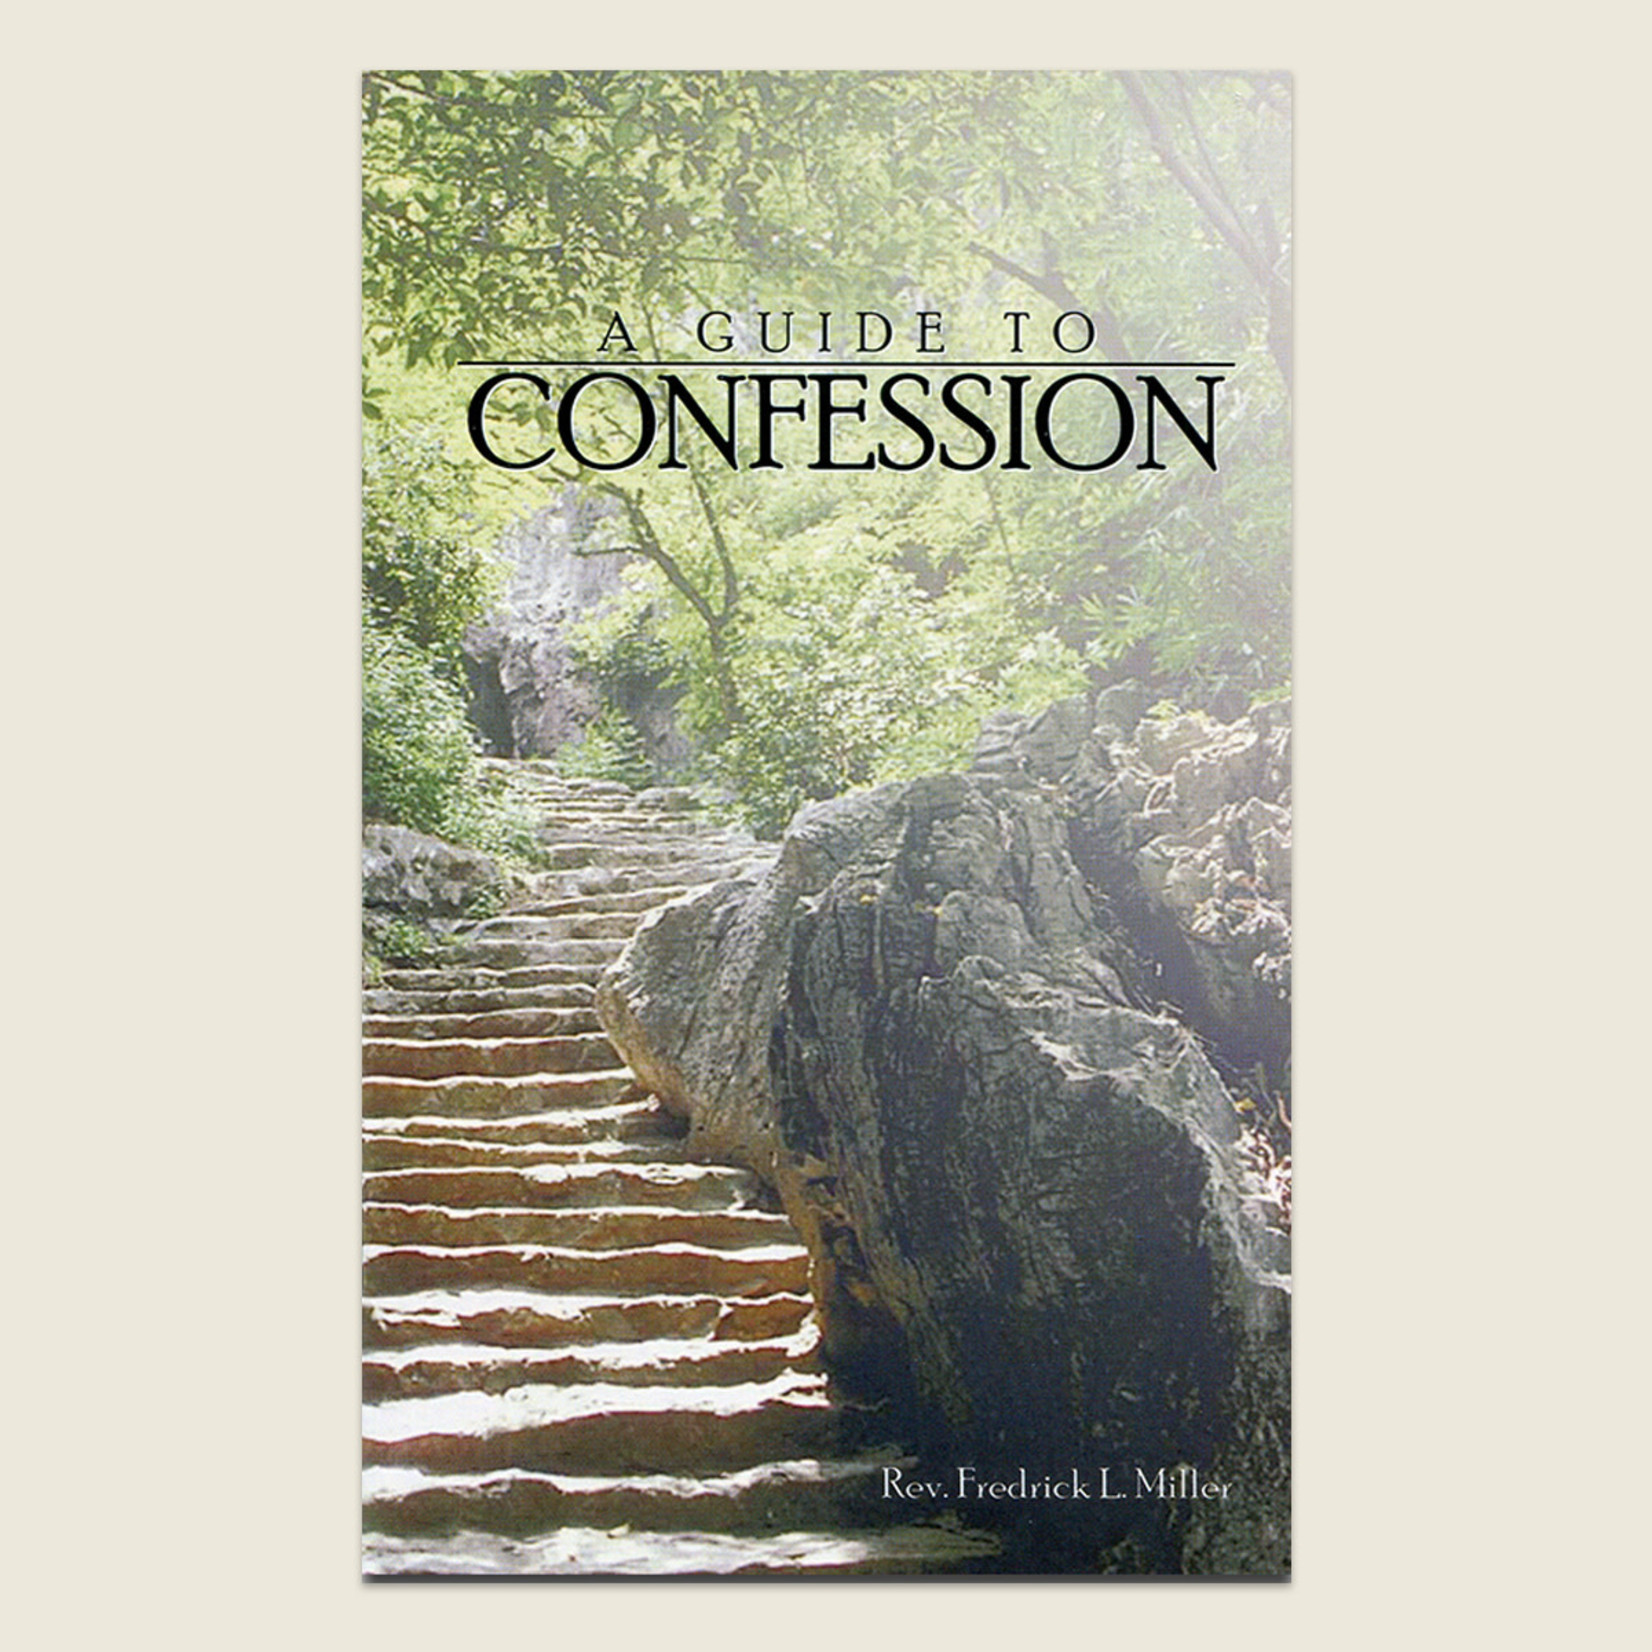 A Guide To Confession